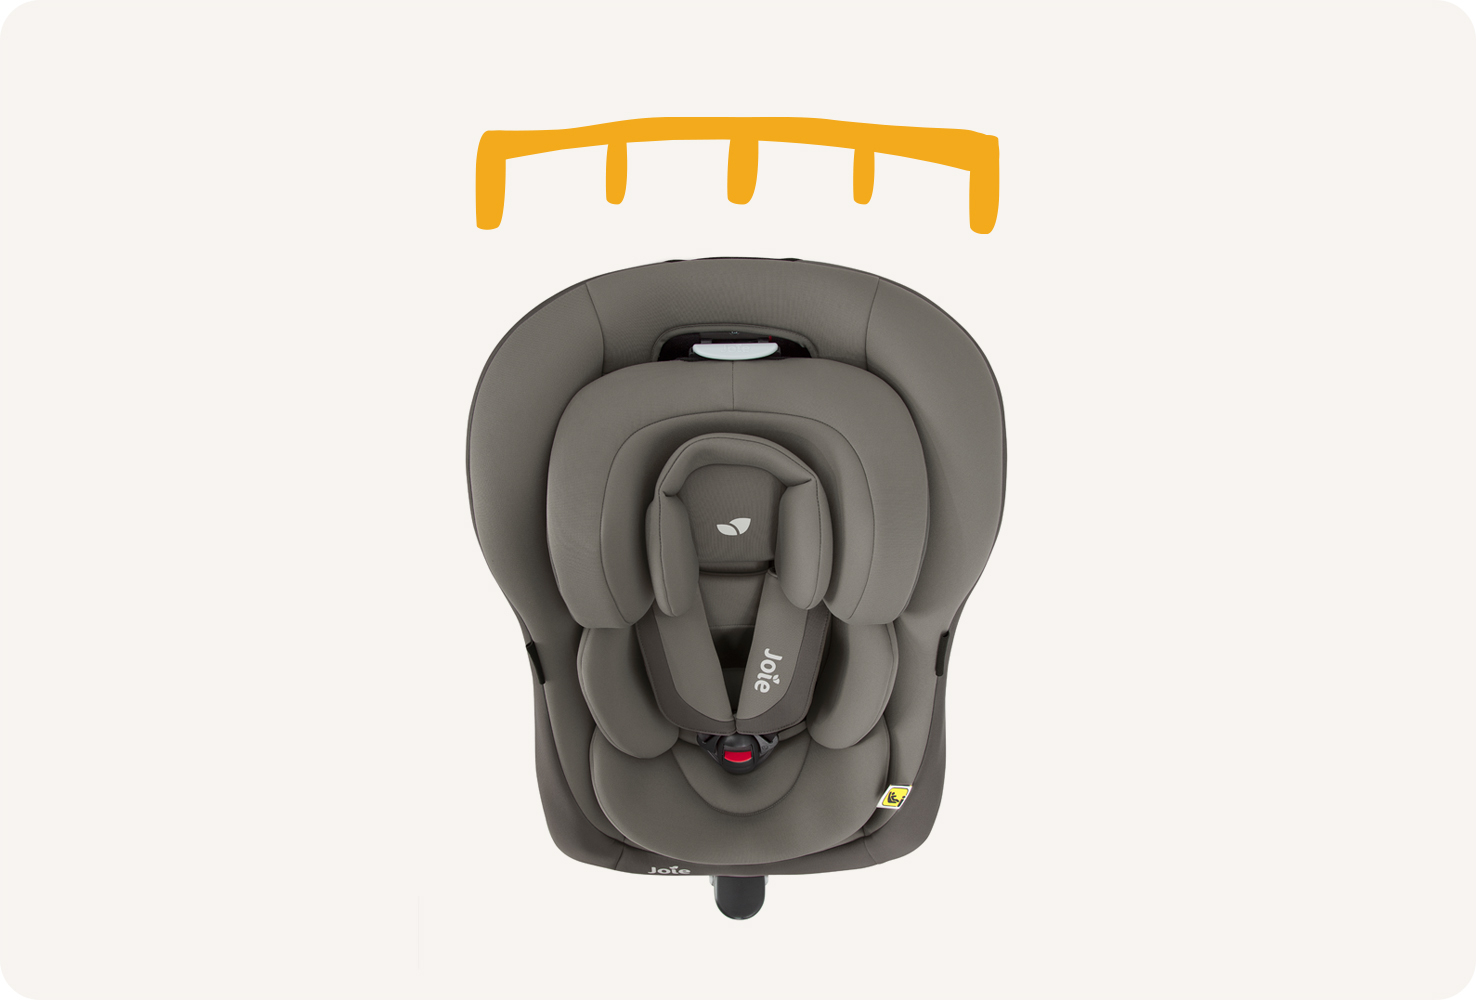 ma2-d-joie-carseats-spin360gti-compact.jpg.jpg